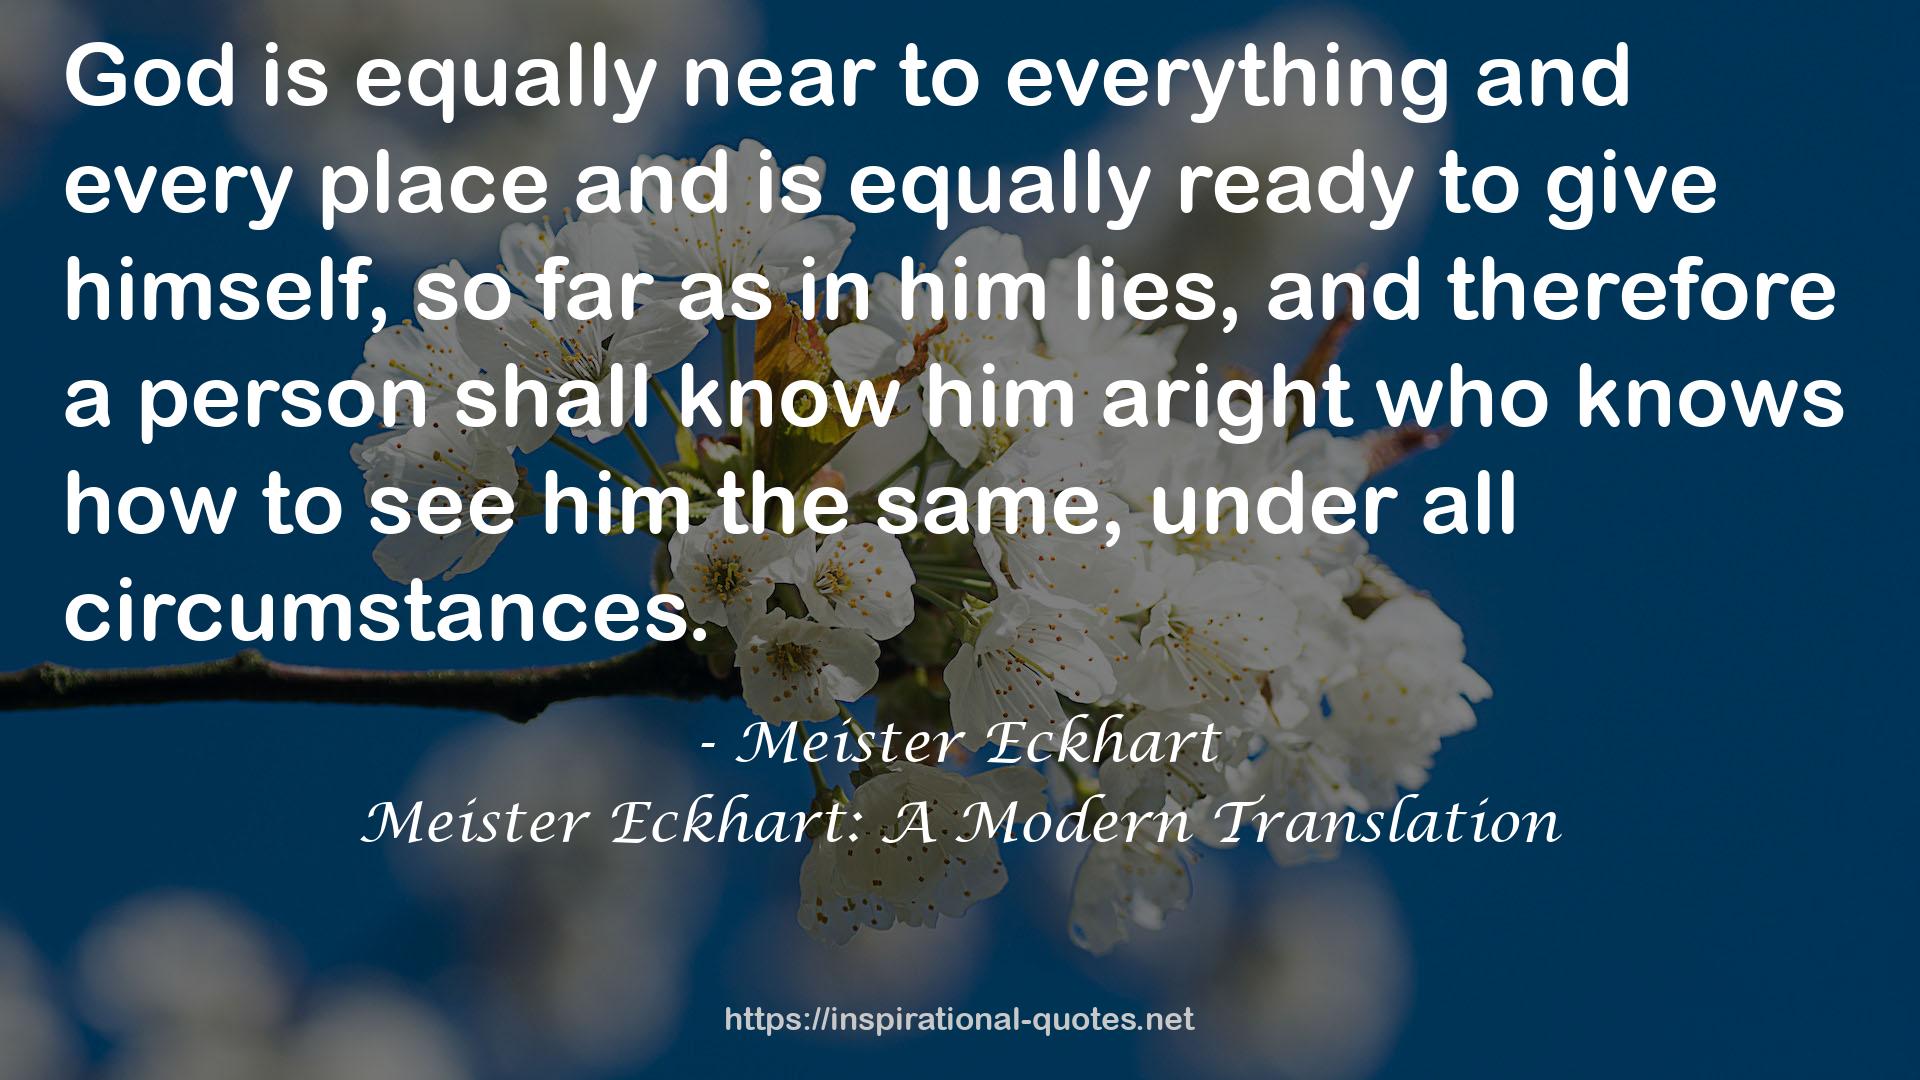 Meister Eckhart: A Modern Translation QUOTES